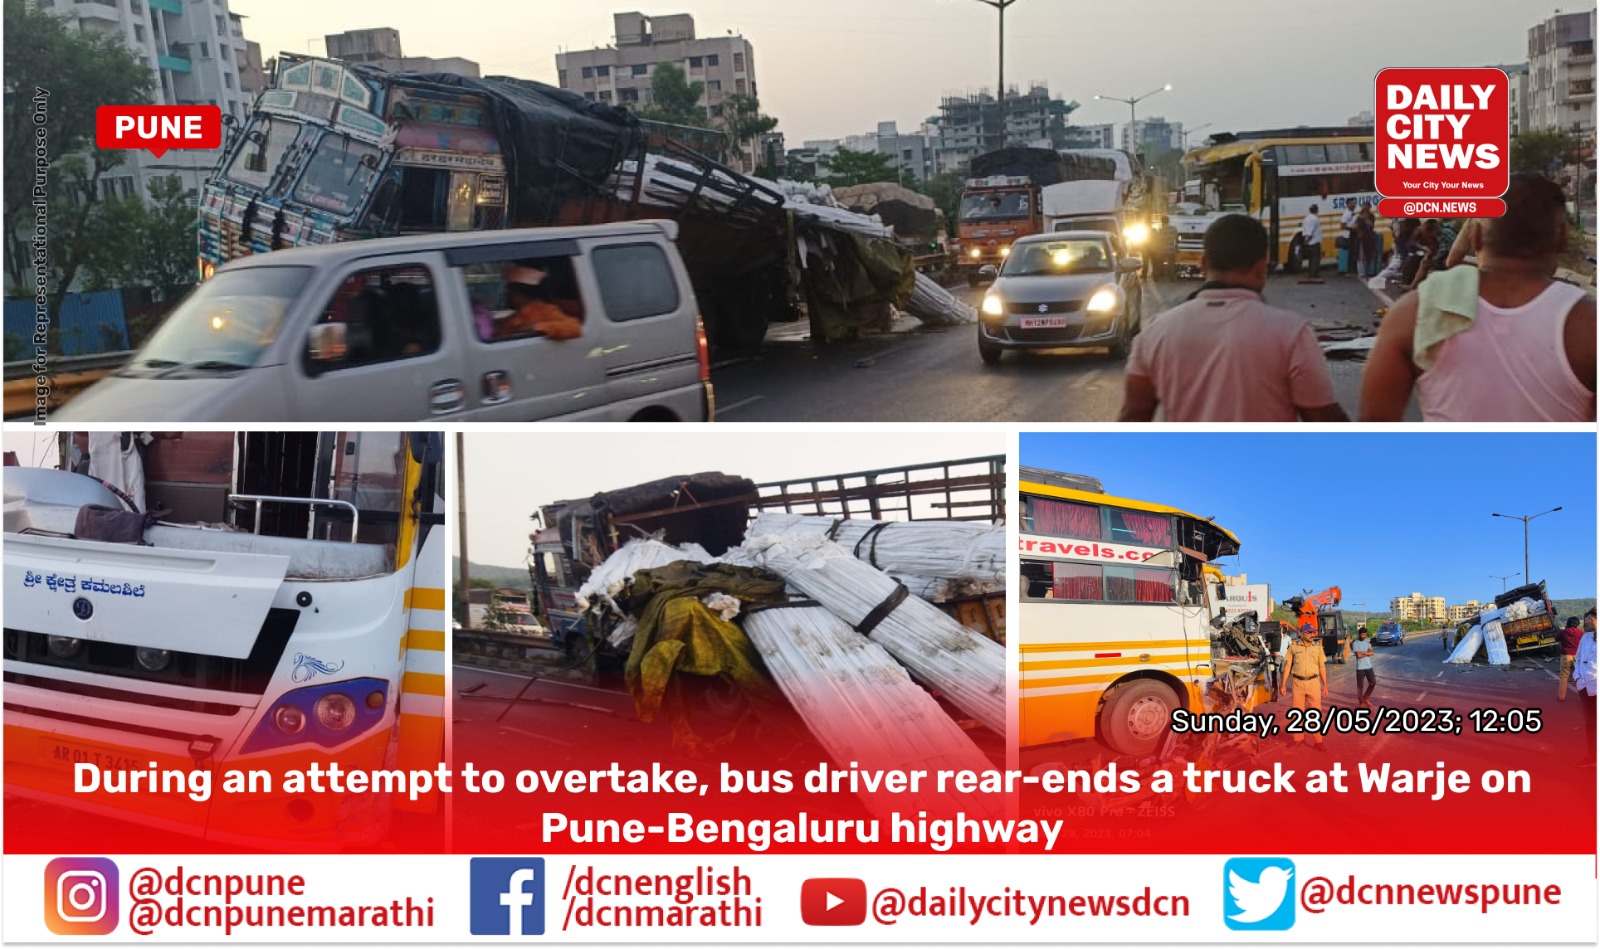 During an attempt to overtake, bus driver rear-ends a truck at Warje on Pune-Bengaluru highway